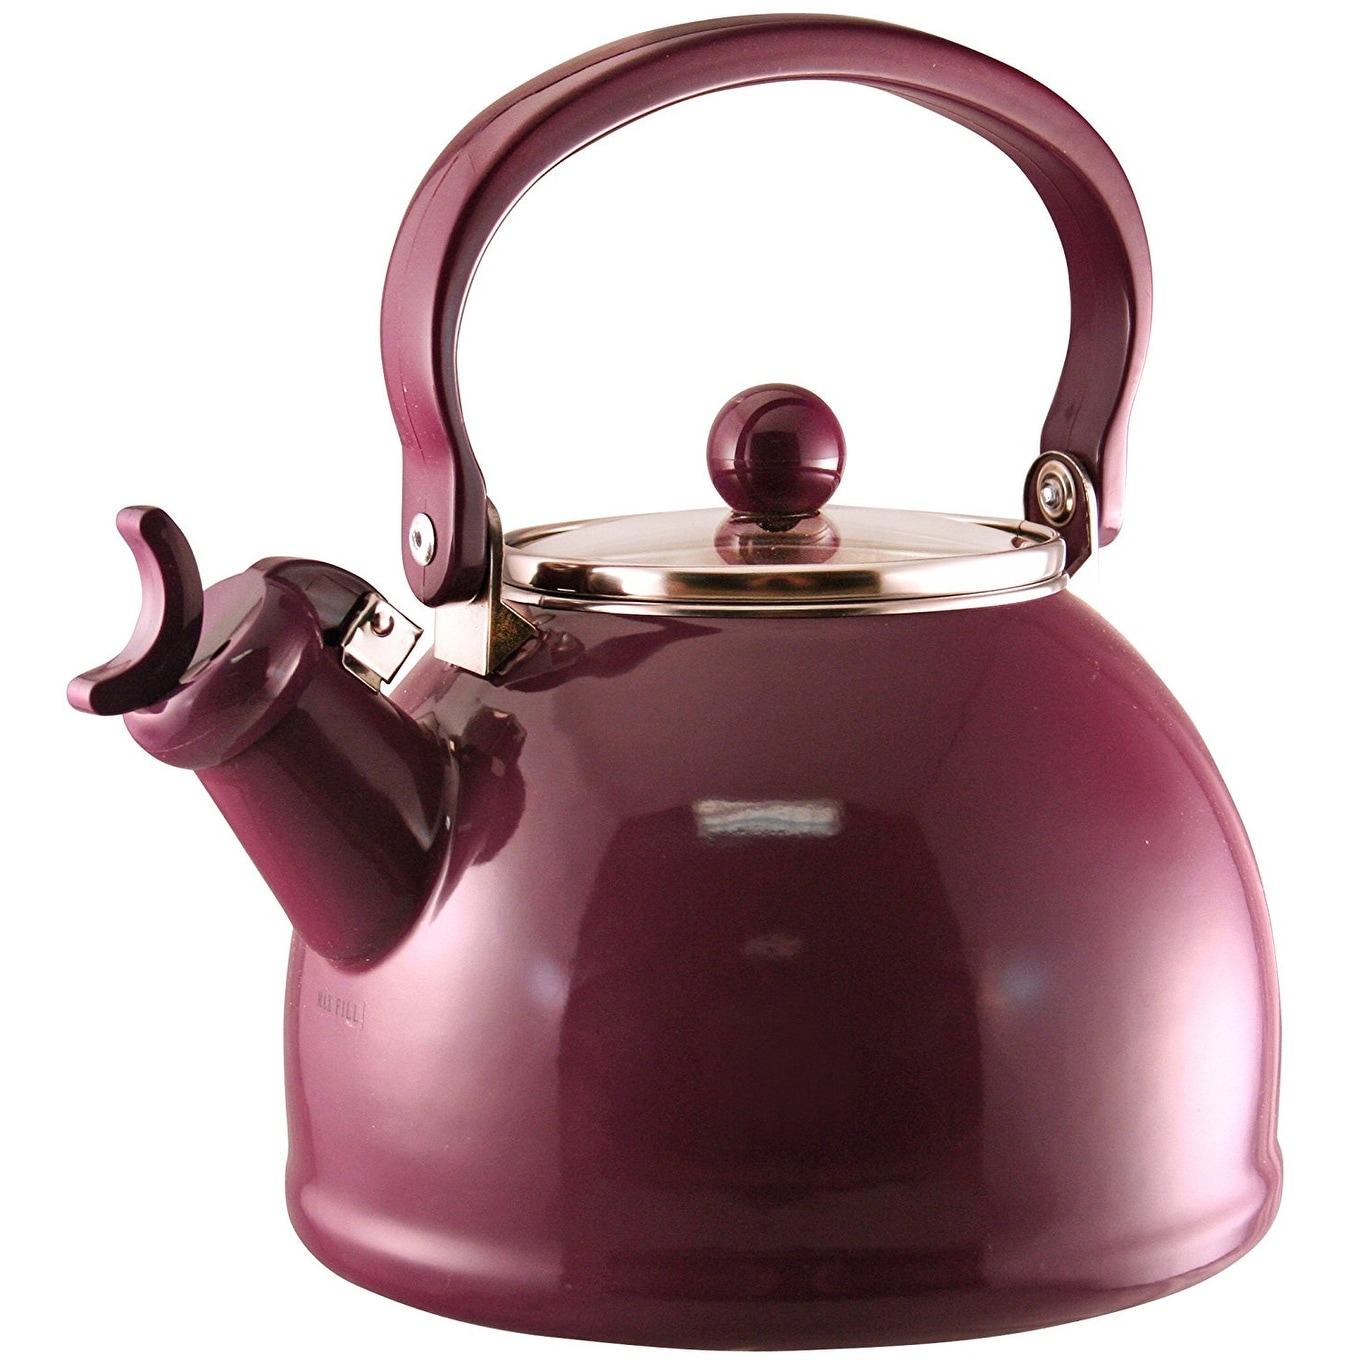 Mr. Coffee Claredale Whistling Tea Kettle, Red, 1.7 quart